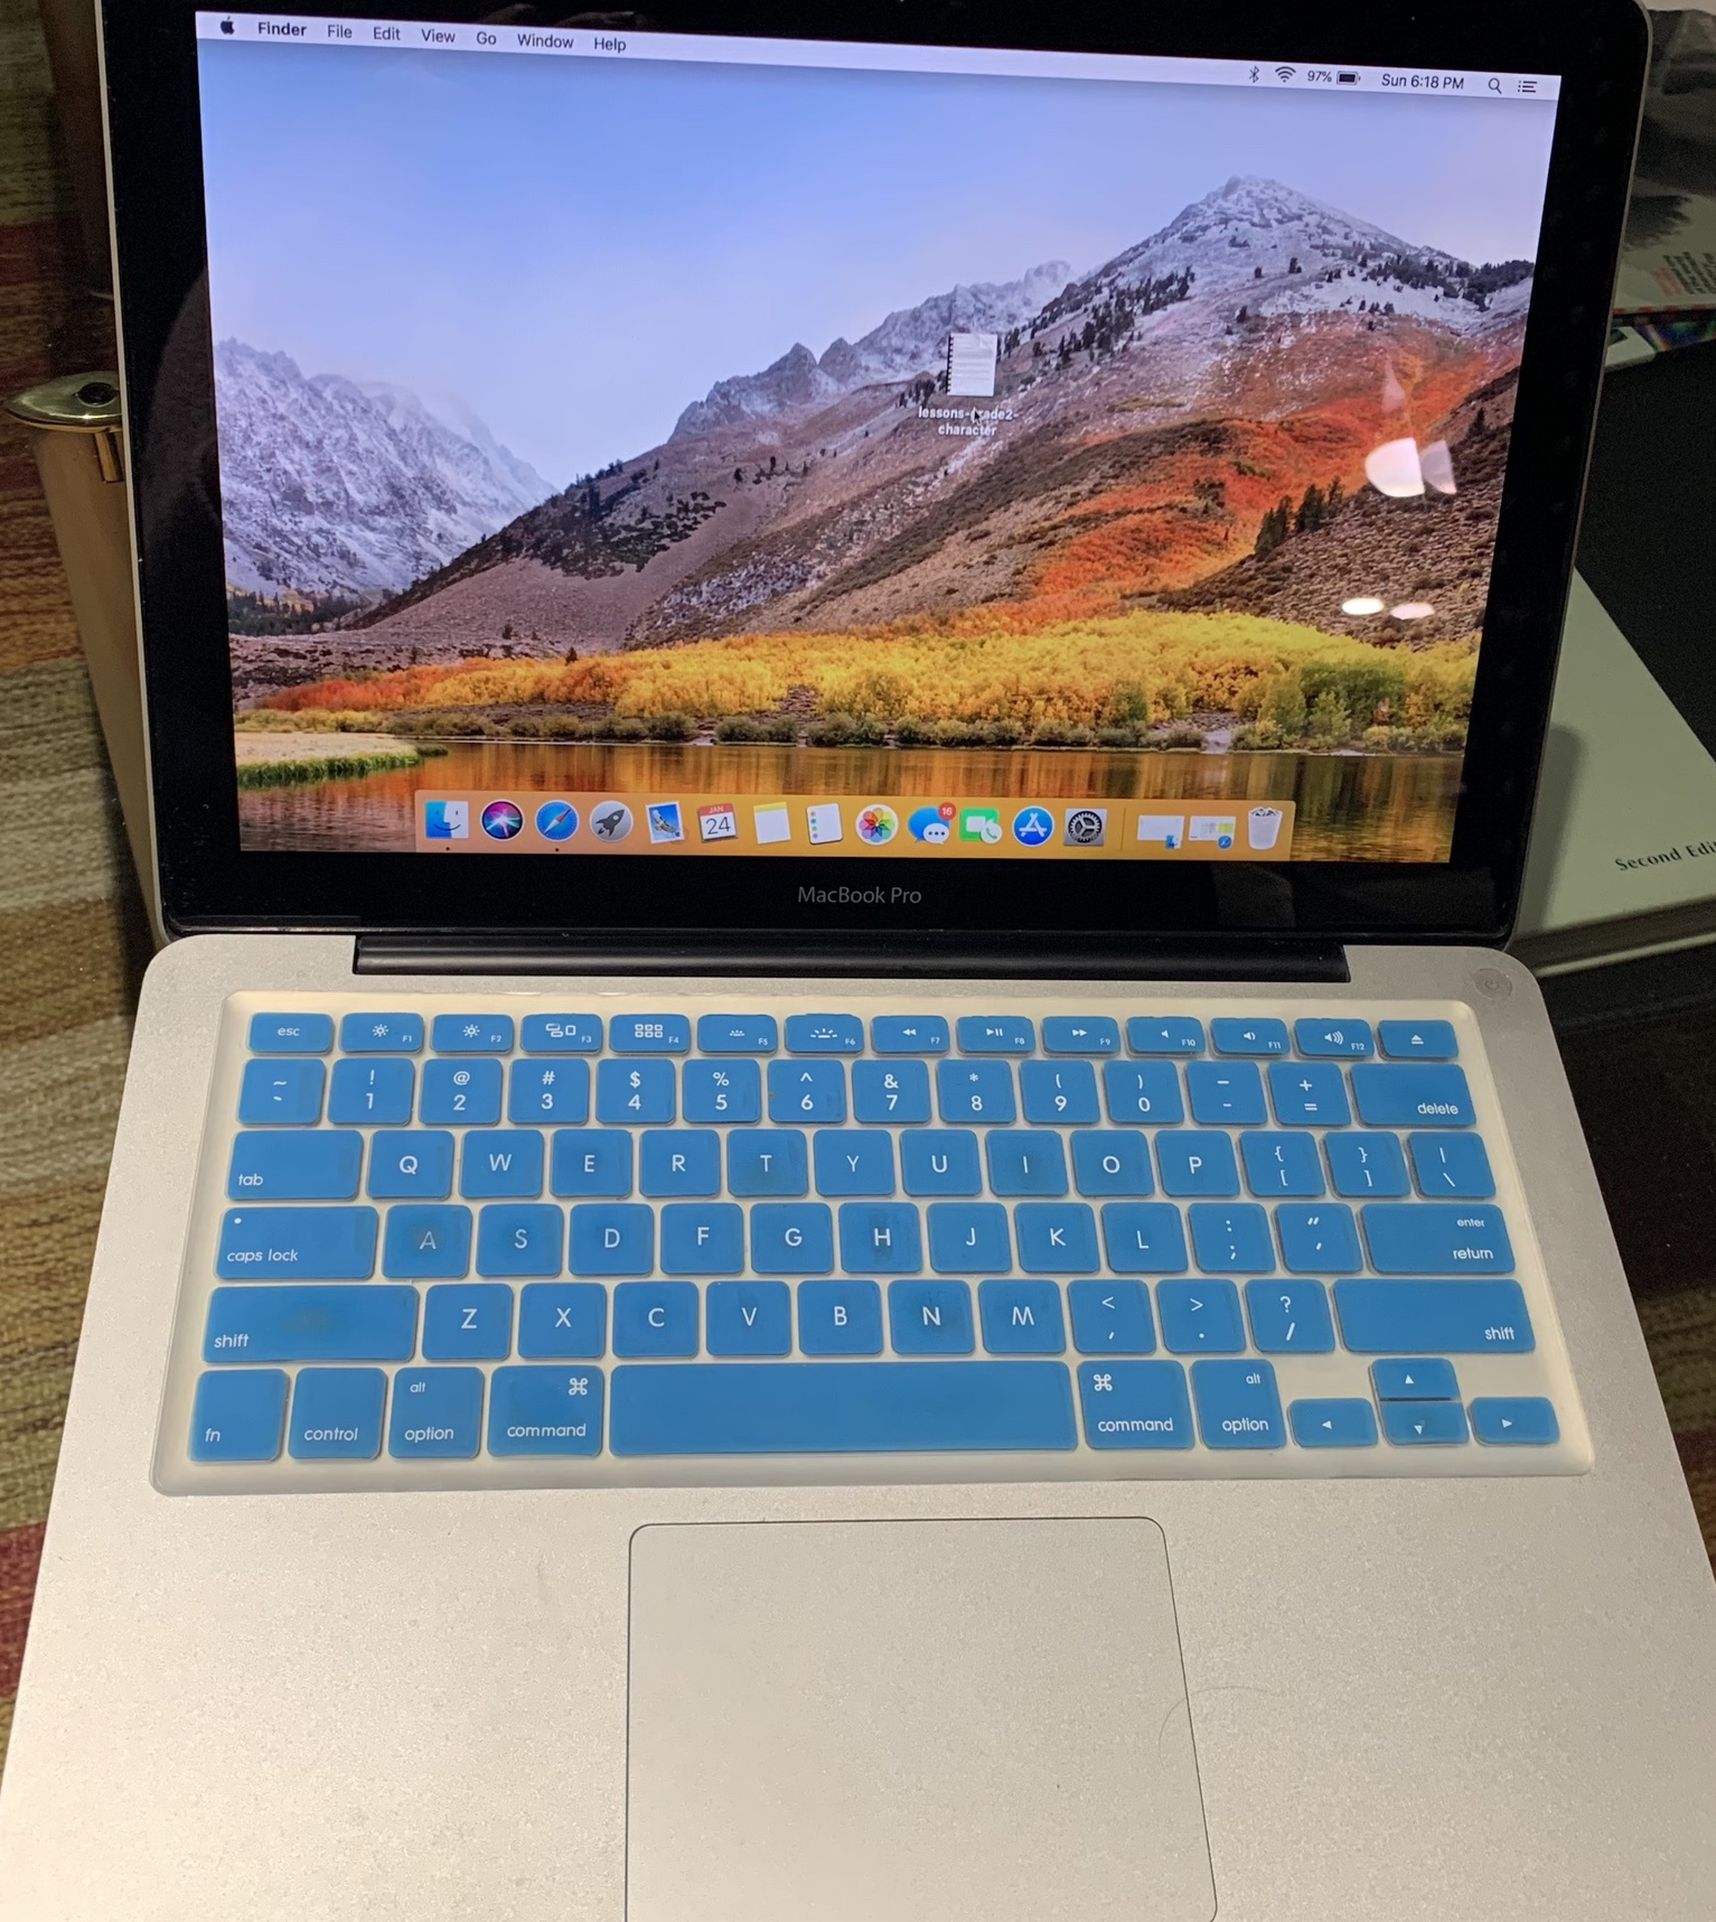 Used Mac book Pro -2010 With CD ROM And SD Card Reader